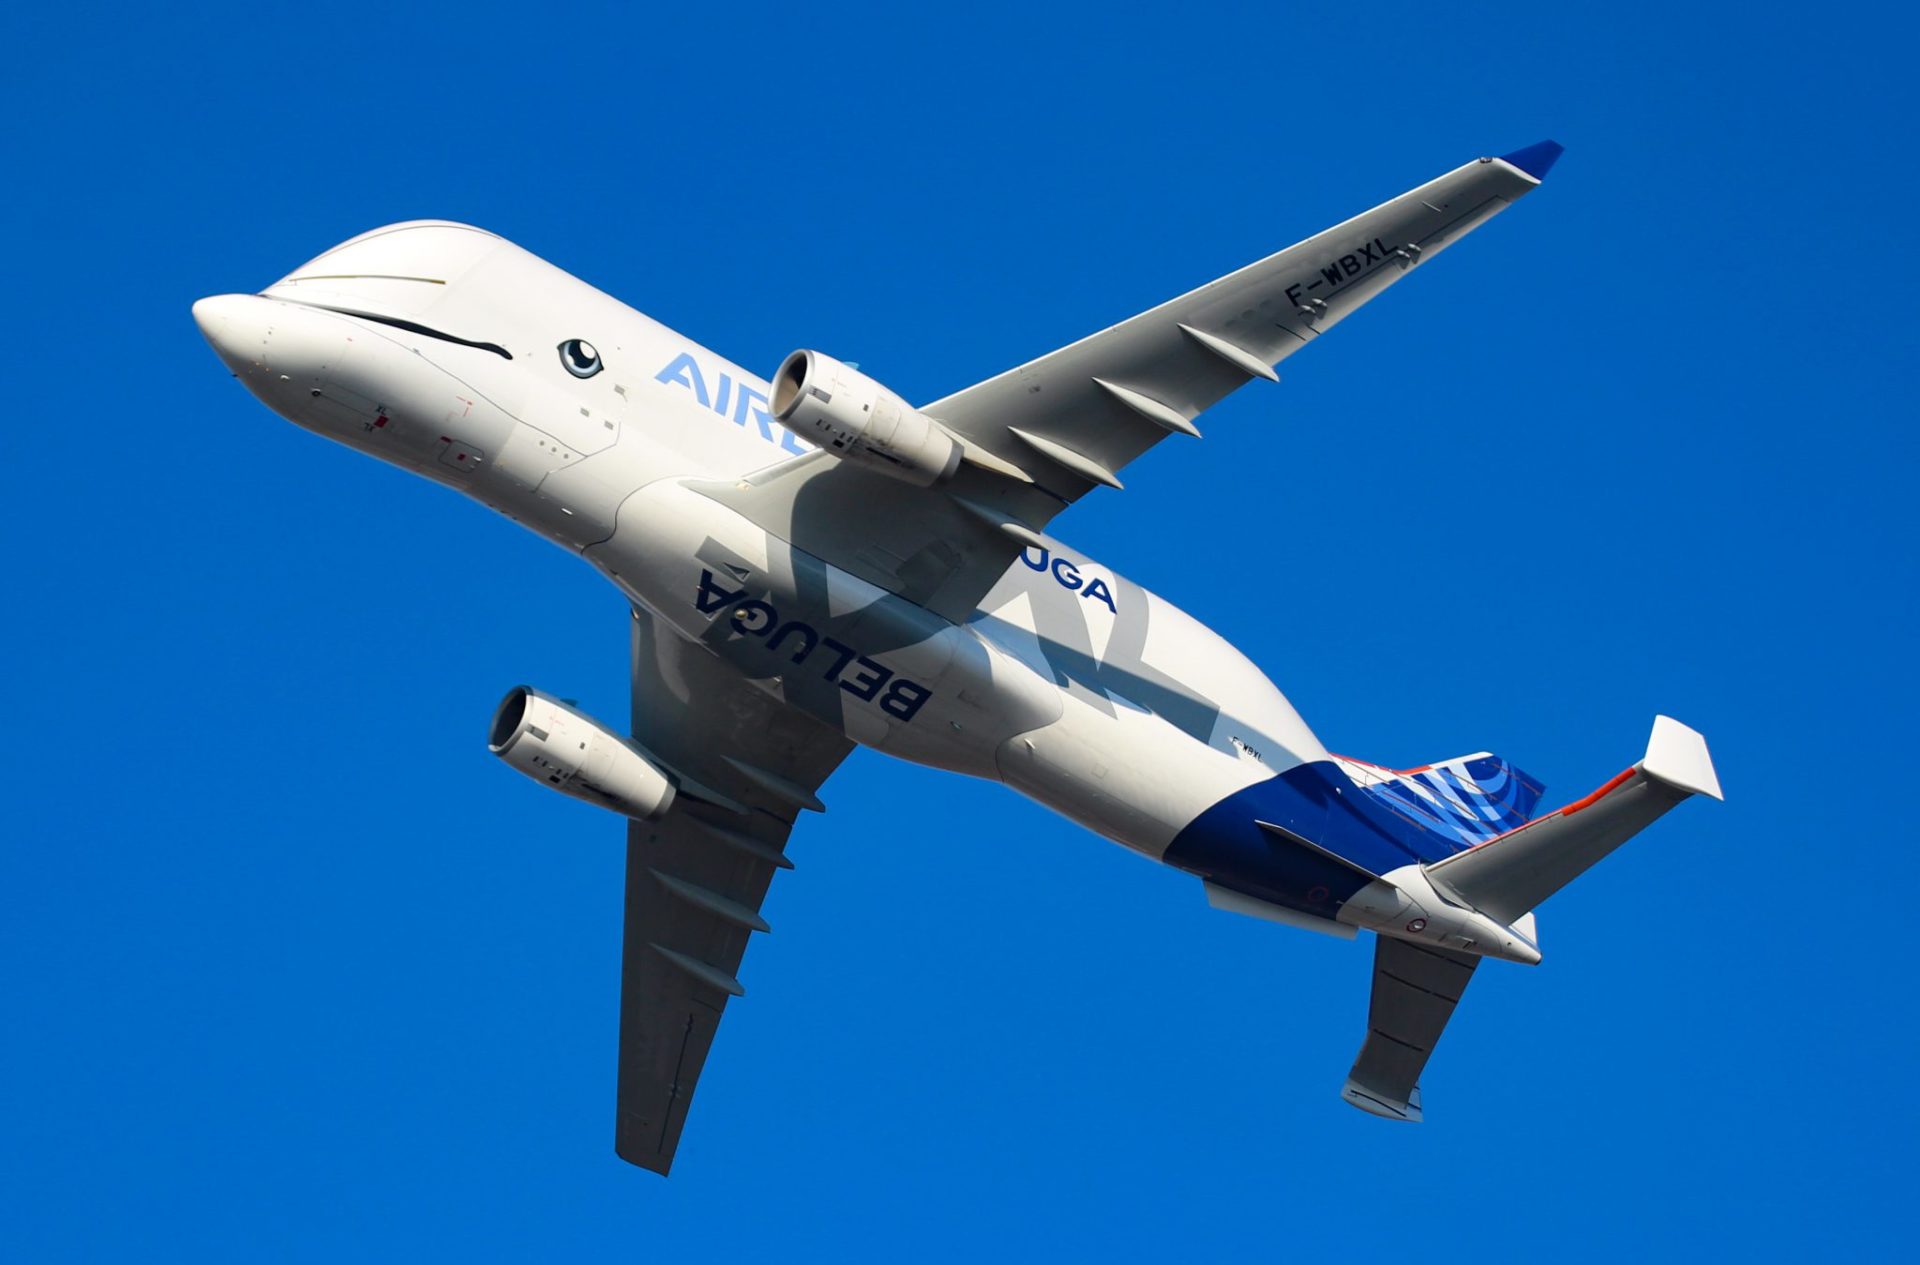 The BelugaXL showing off its whale characteristics (Image: Aviation Media Co.)